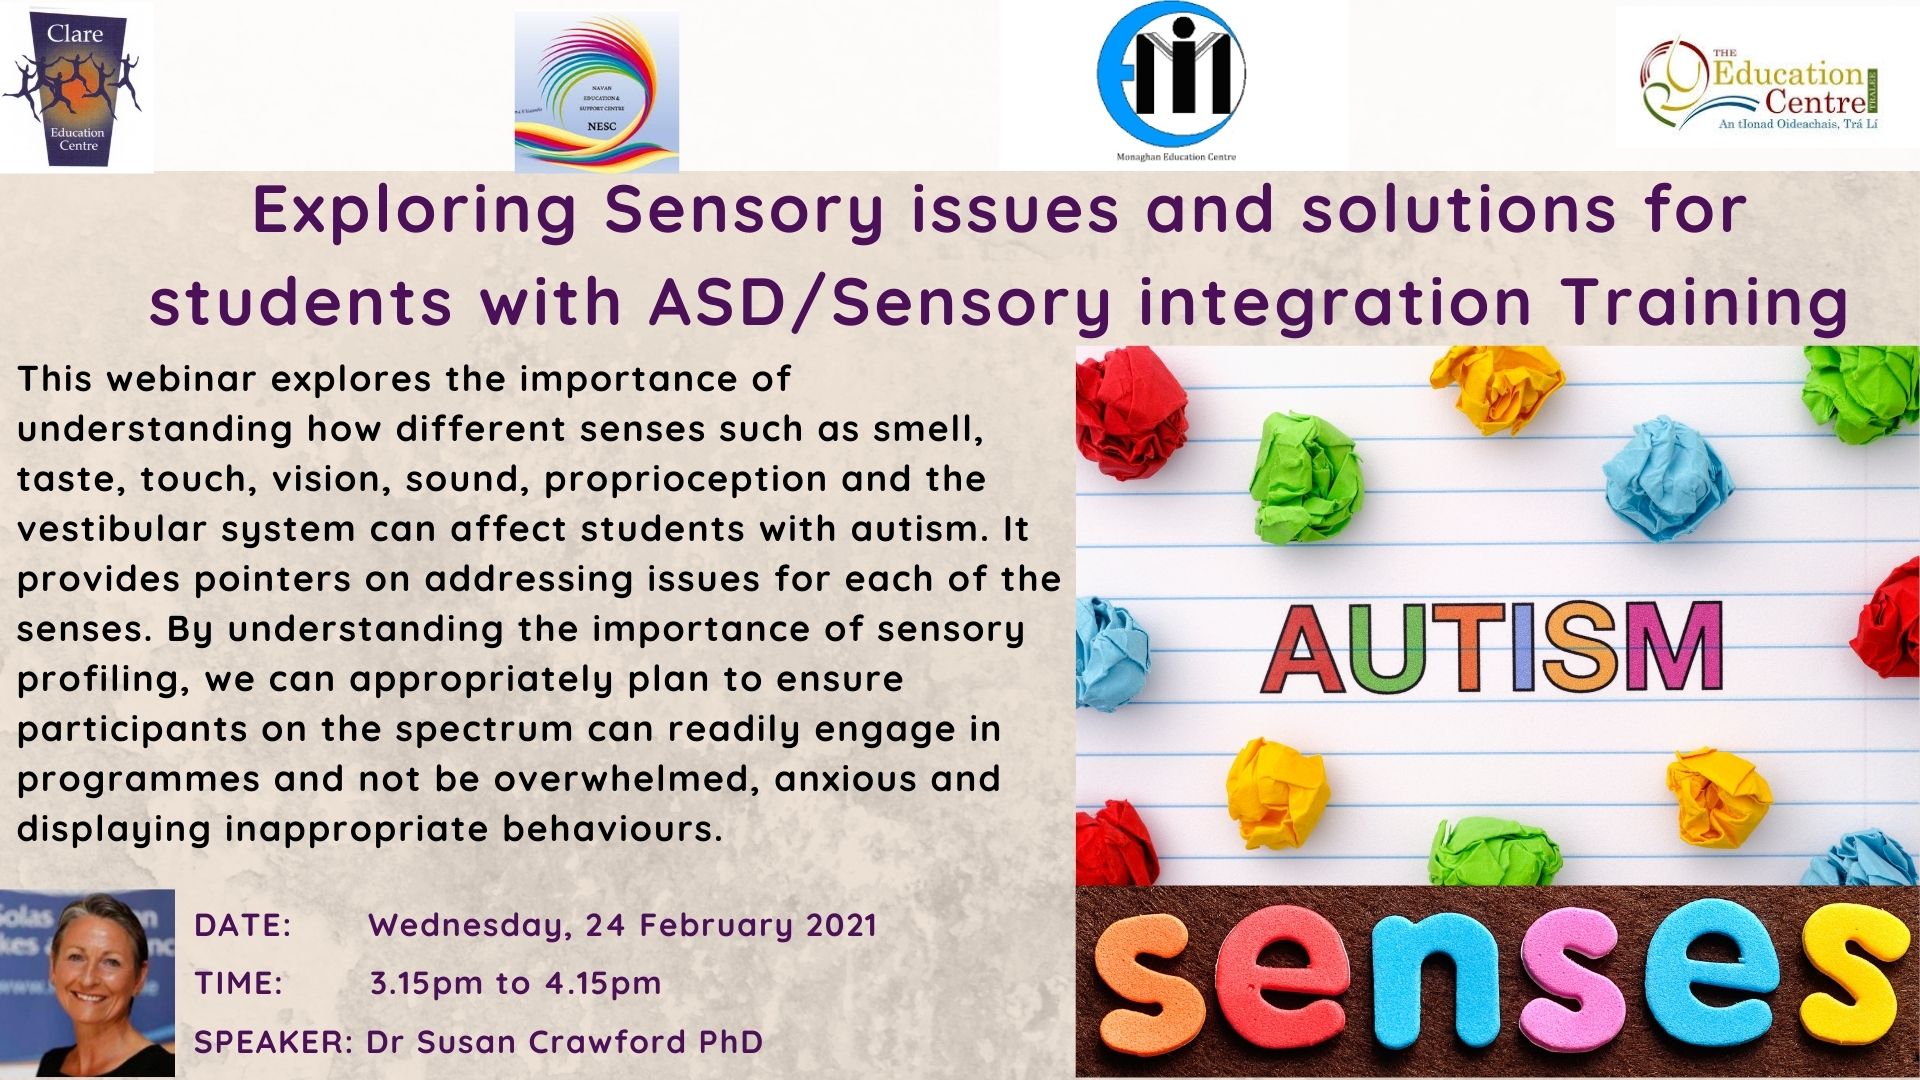 SP113-21 Exploring Sensory issues and solutions for students with ASD/Sensory integration Training